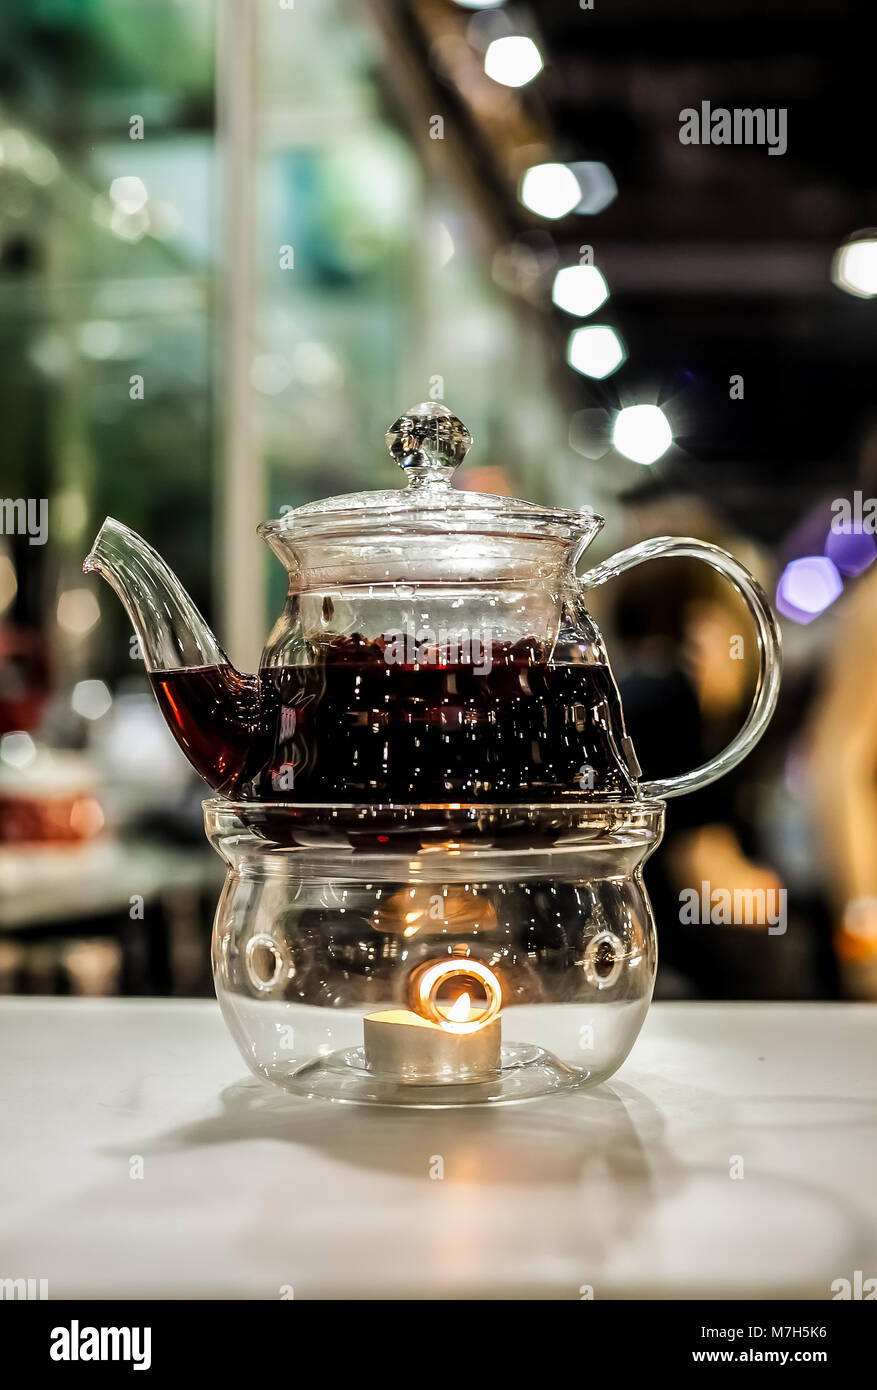 https://c8.alamy.com/comp/M7H5K6/ornate-glass-teapot-with-purple-herbal-tea-infusion-heated-with-a-M7H5K6.jpg